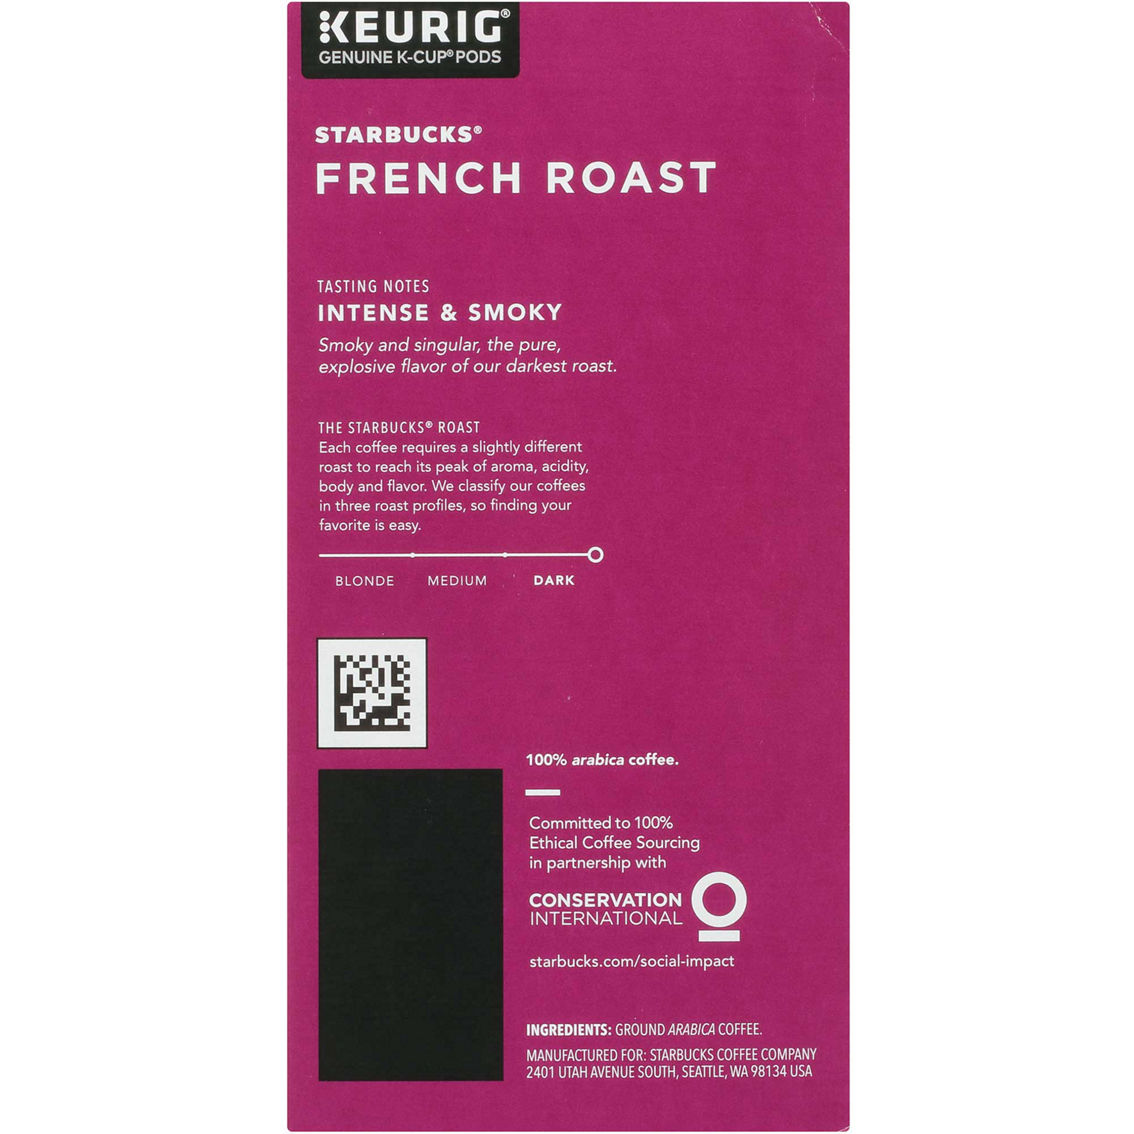 Starbucks K-Cup French Roast Coffee Pods 22 ct. - Image 5 of 6